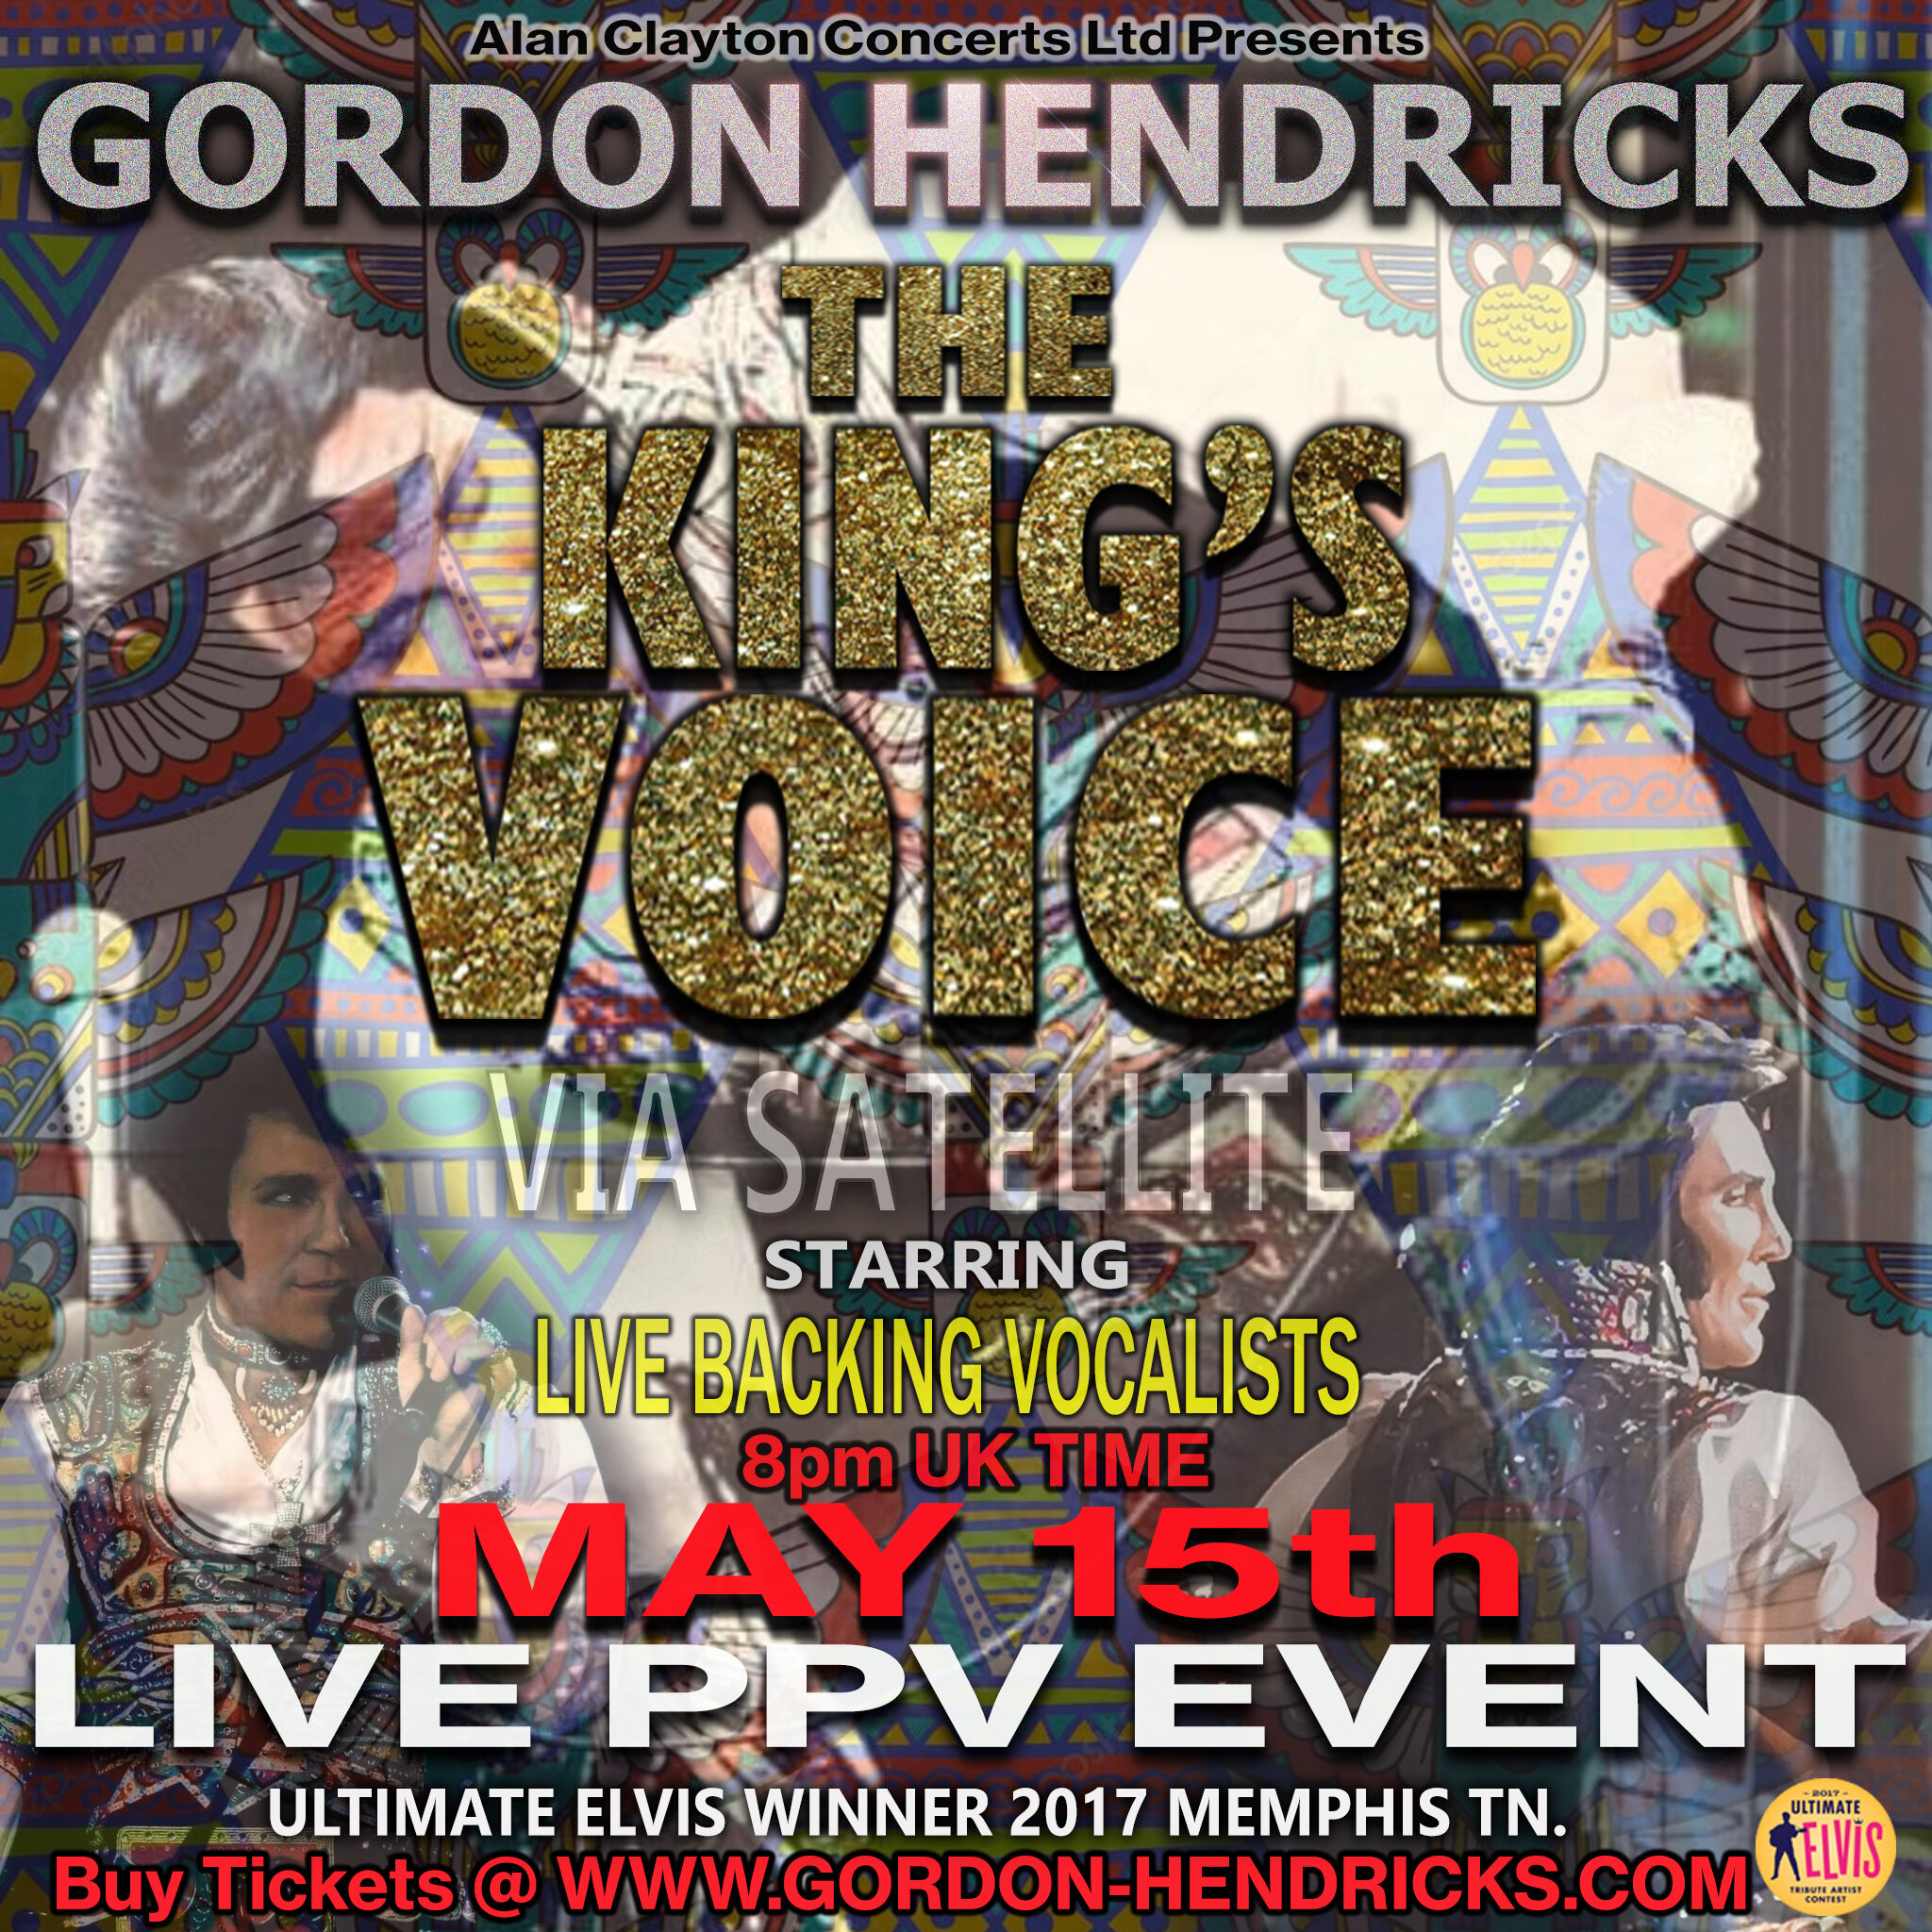 The Kings Voice-Saturday 15th May 21 Facebook